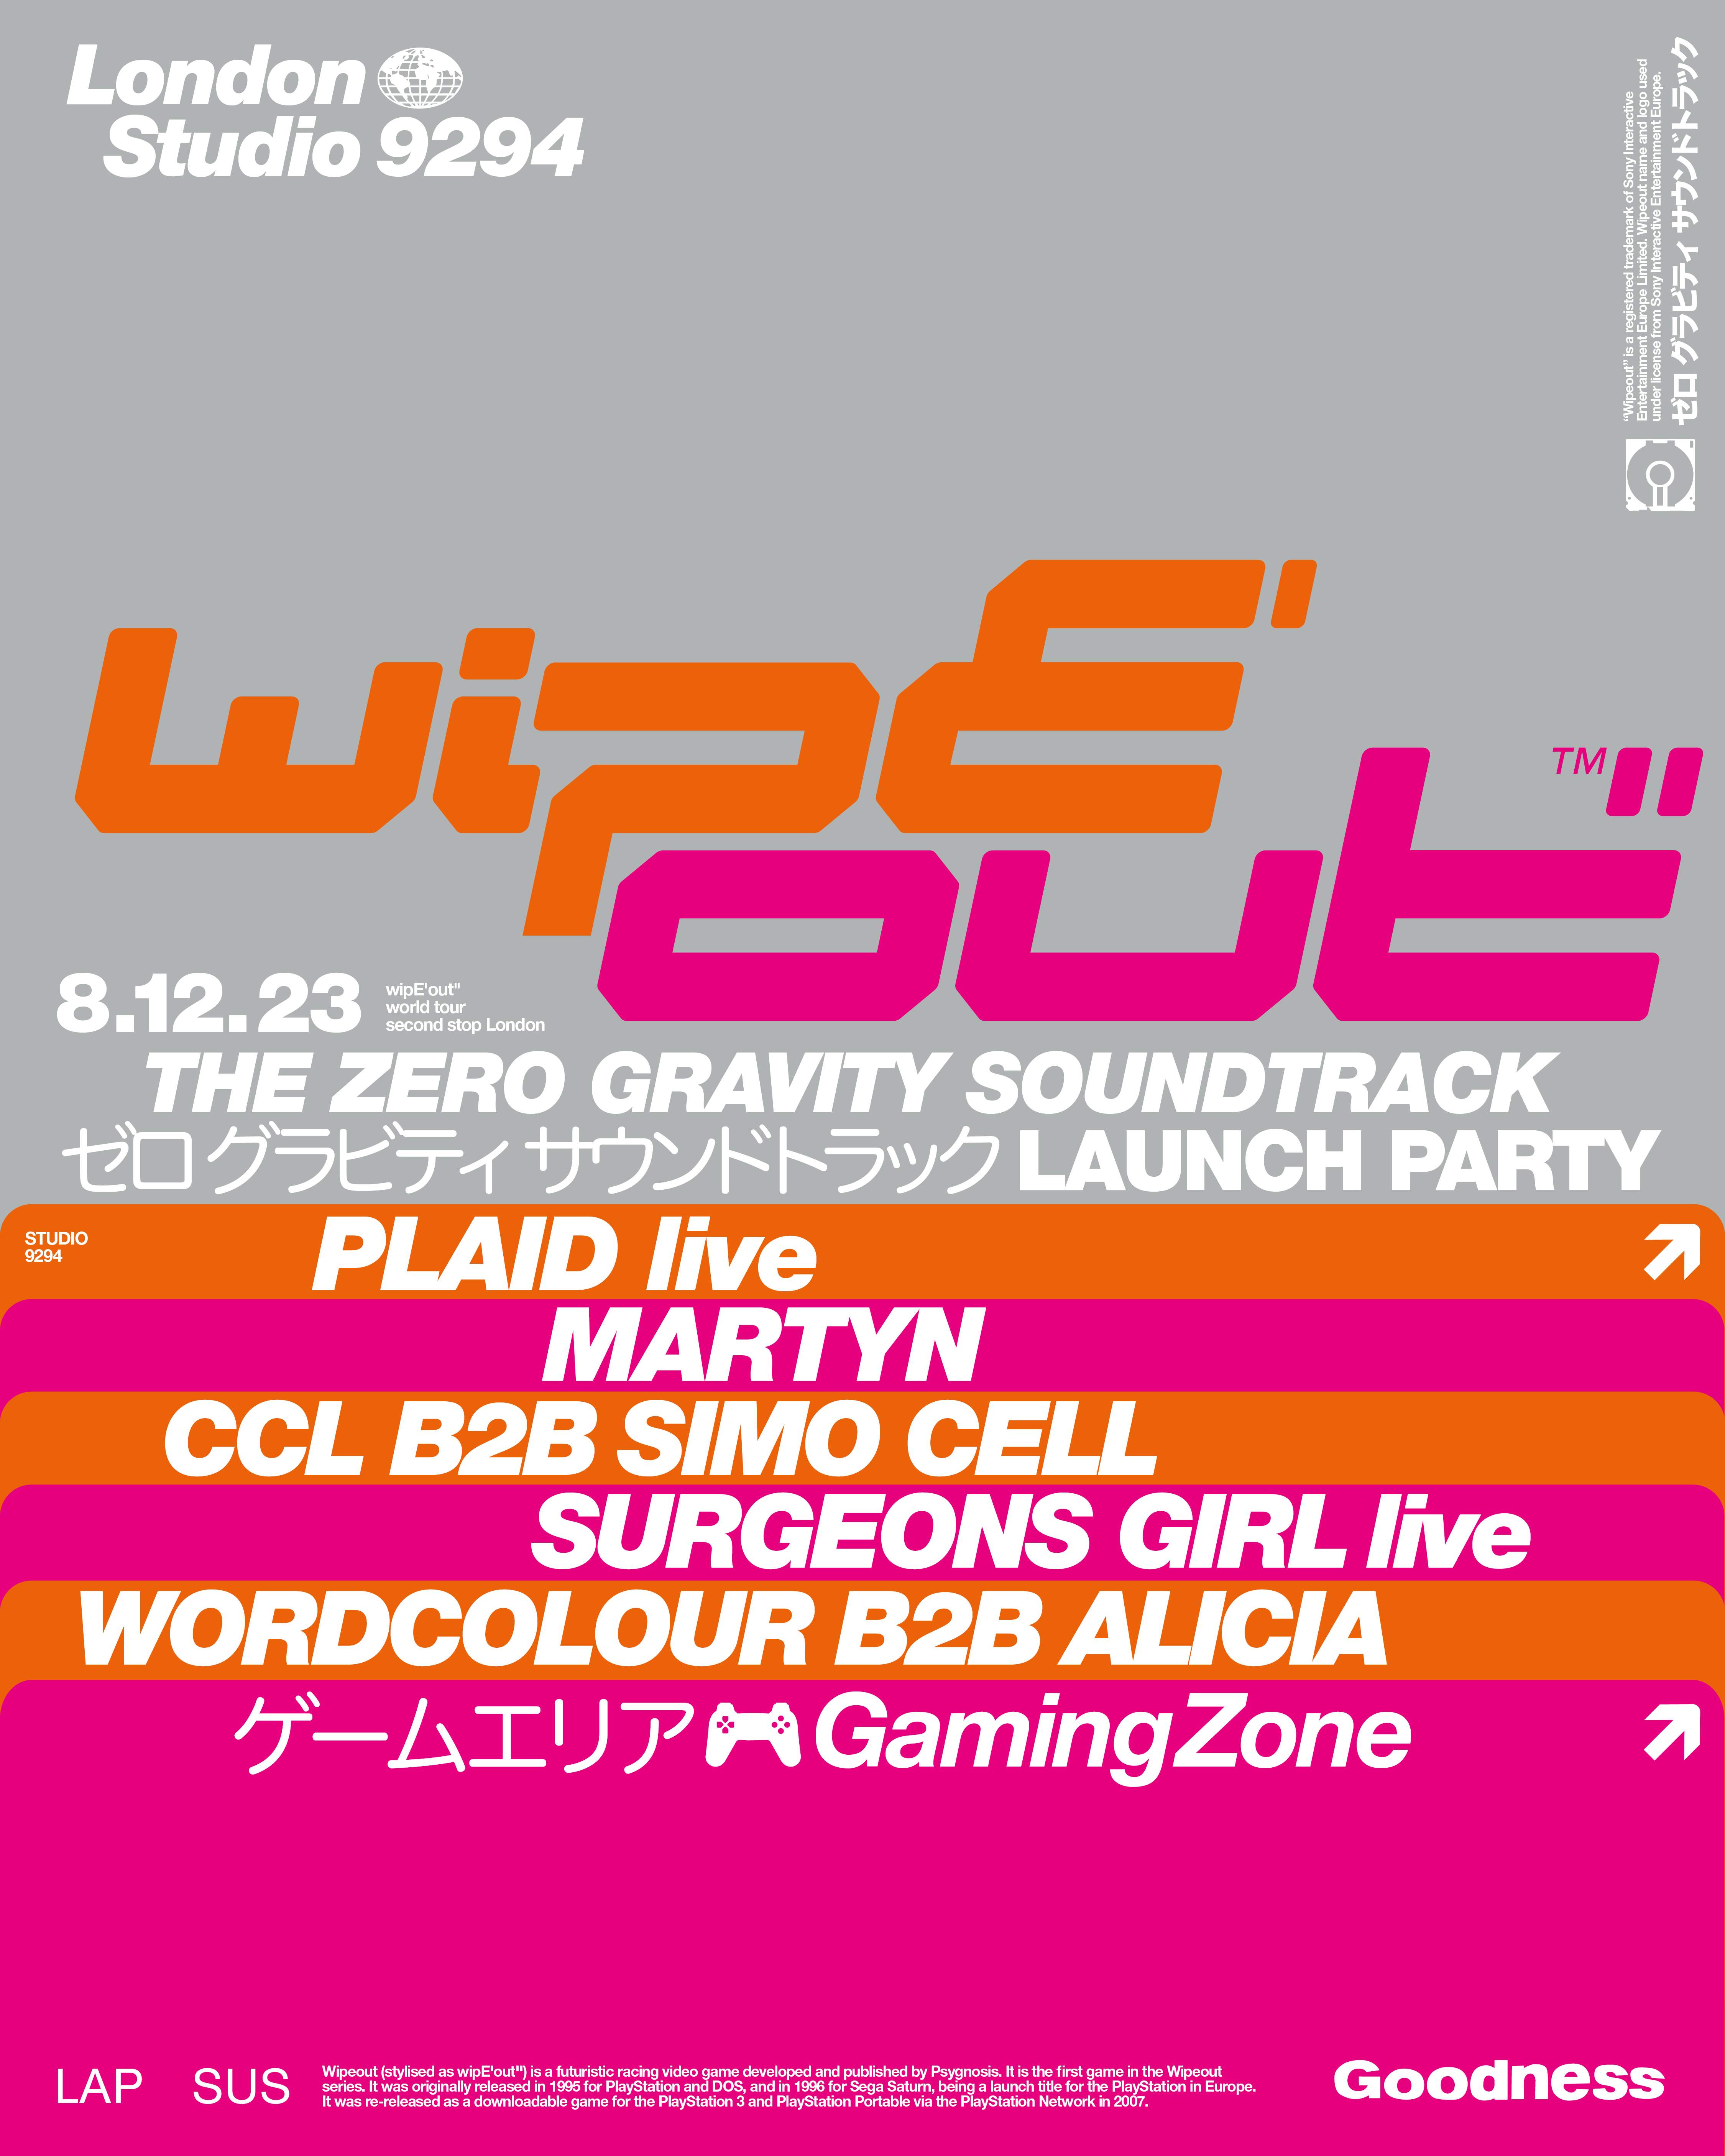 Goodness x Lapsus: Plaid [live], Martyn, Simo Cell b2b CCL, Surgeons Girl [live]  - フライヤー表